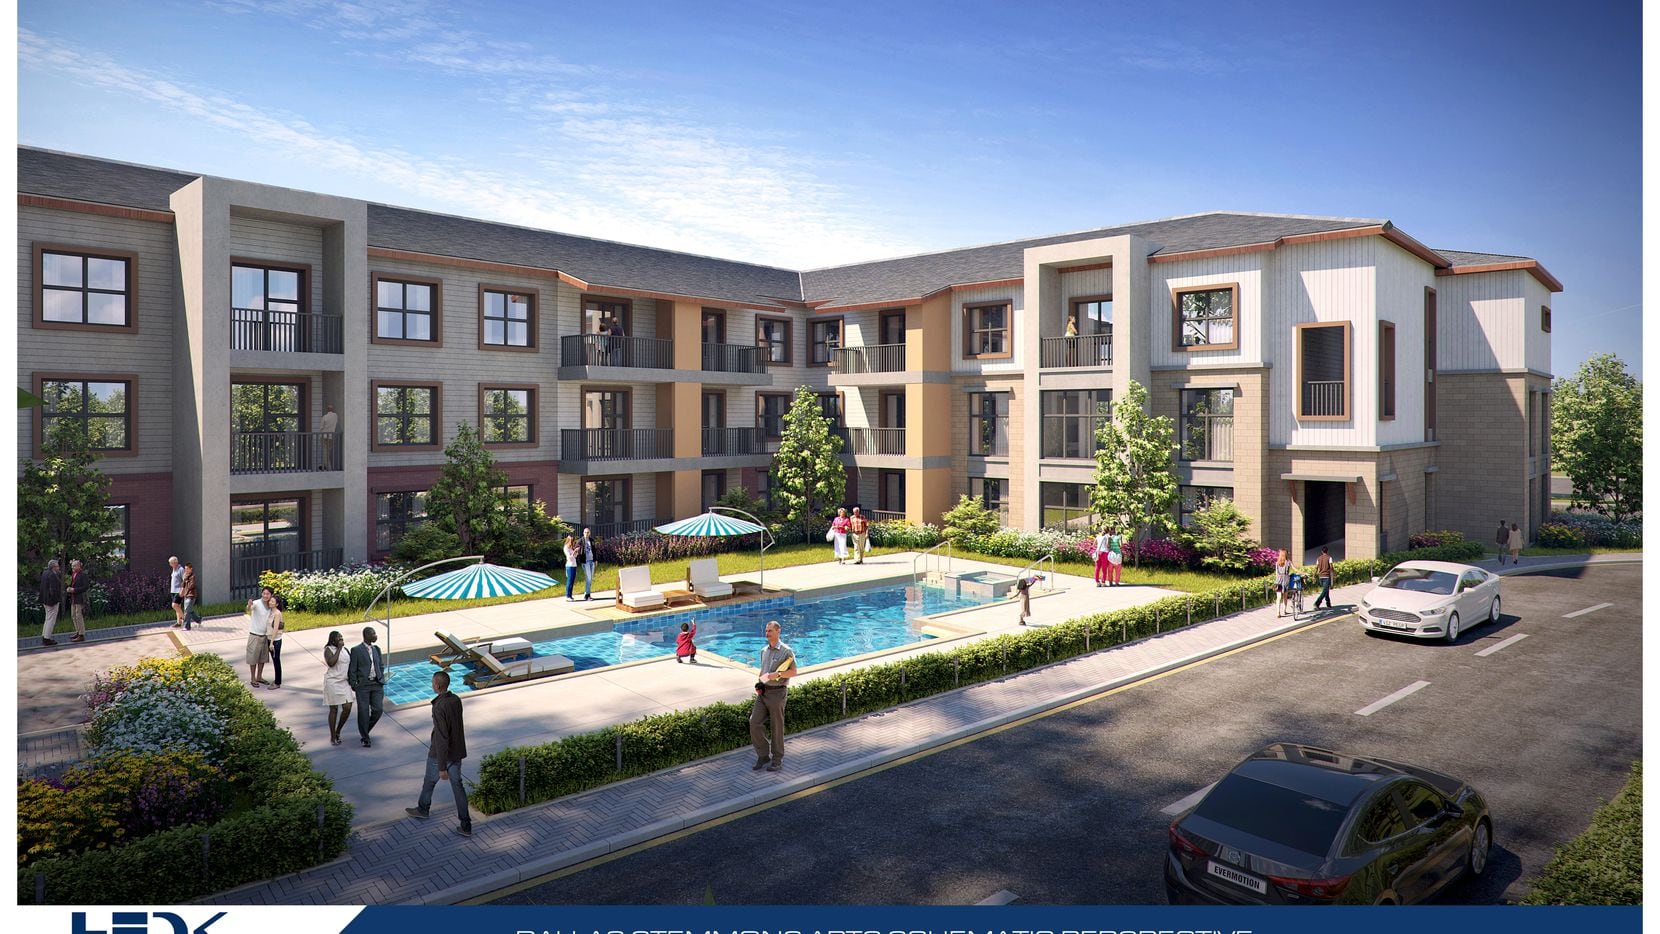 Palladium USA's new rental community on Stemmons Freeway in Dallas will have almost 90 units.